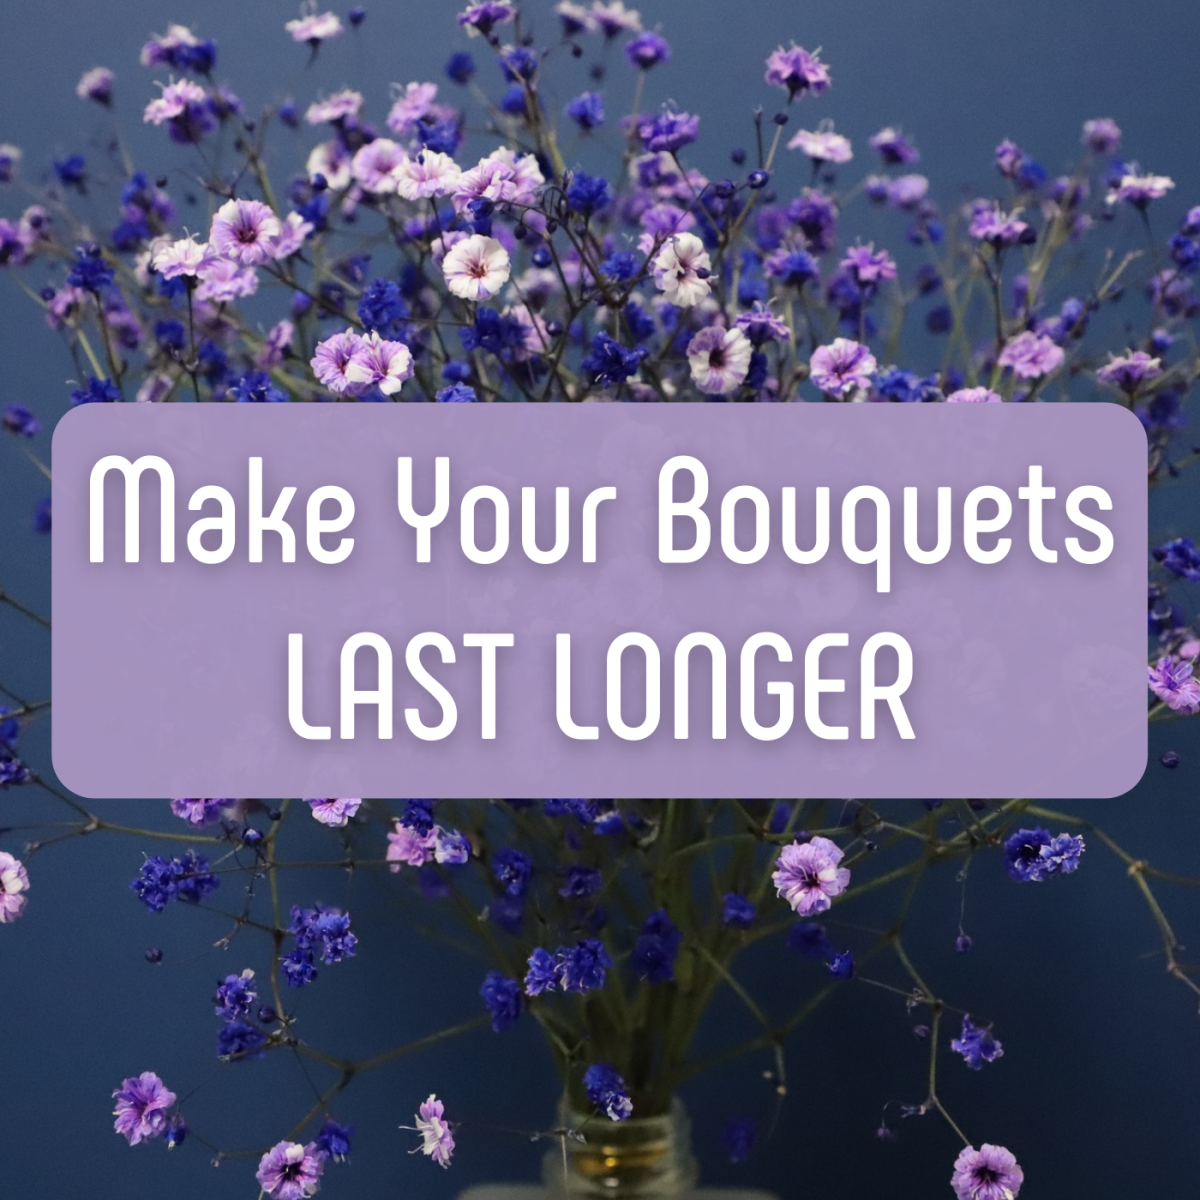 How to Make Bouquets of Cut Flowers Last Longer